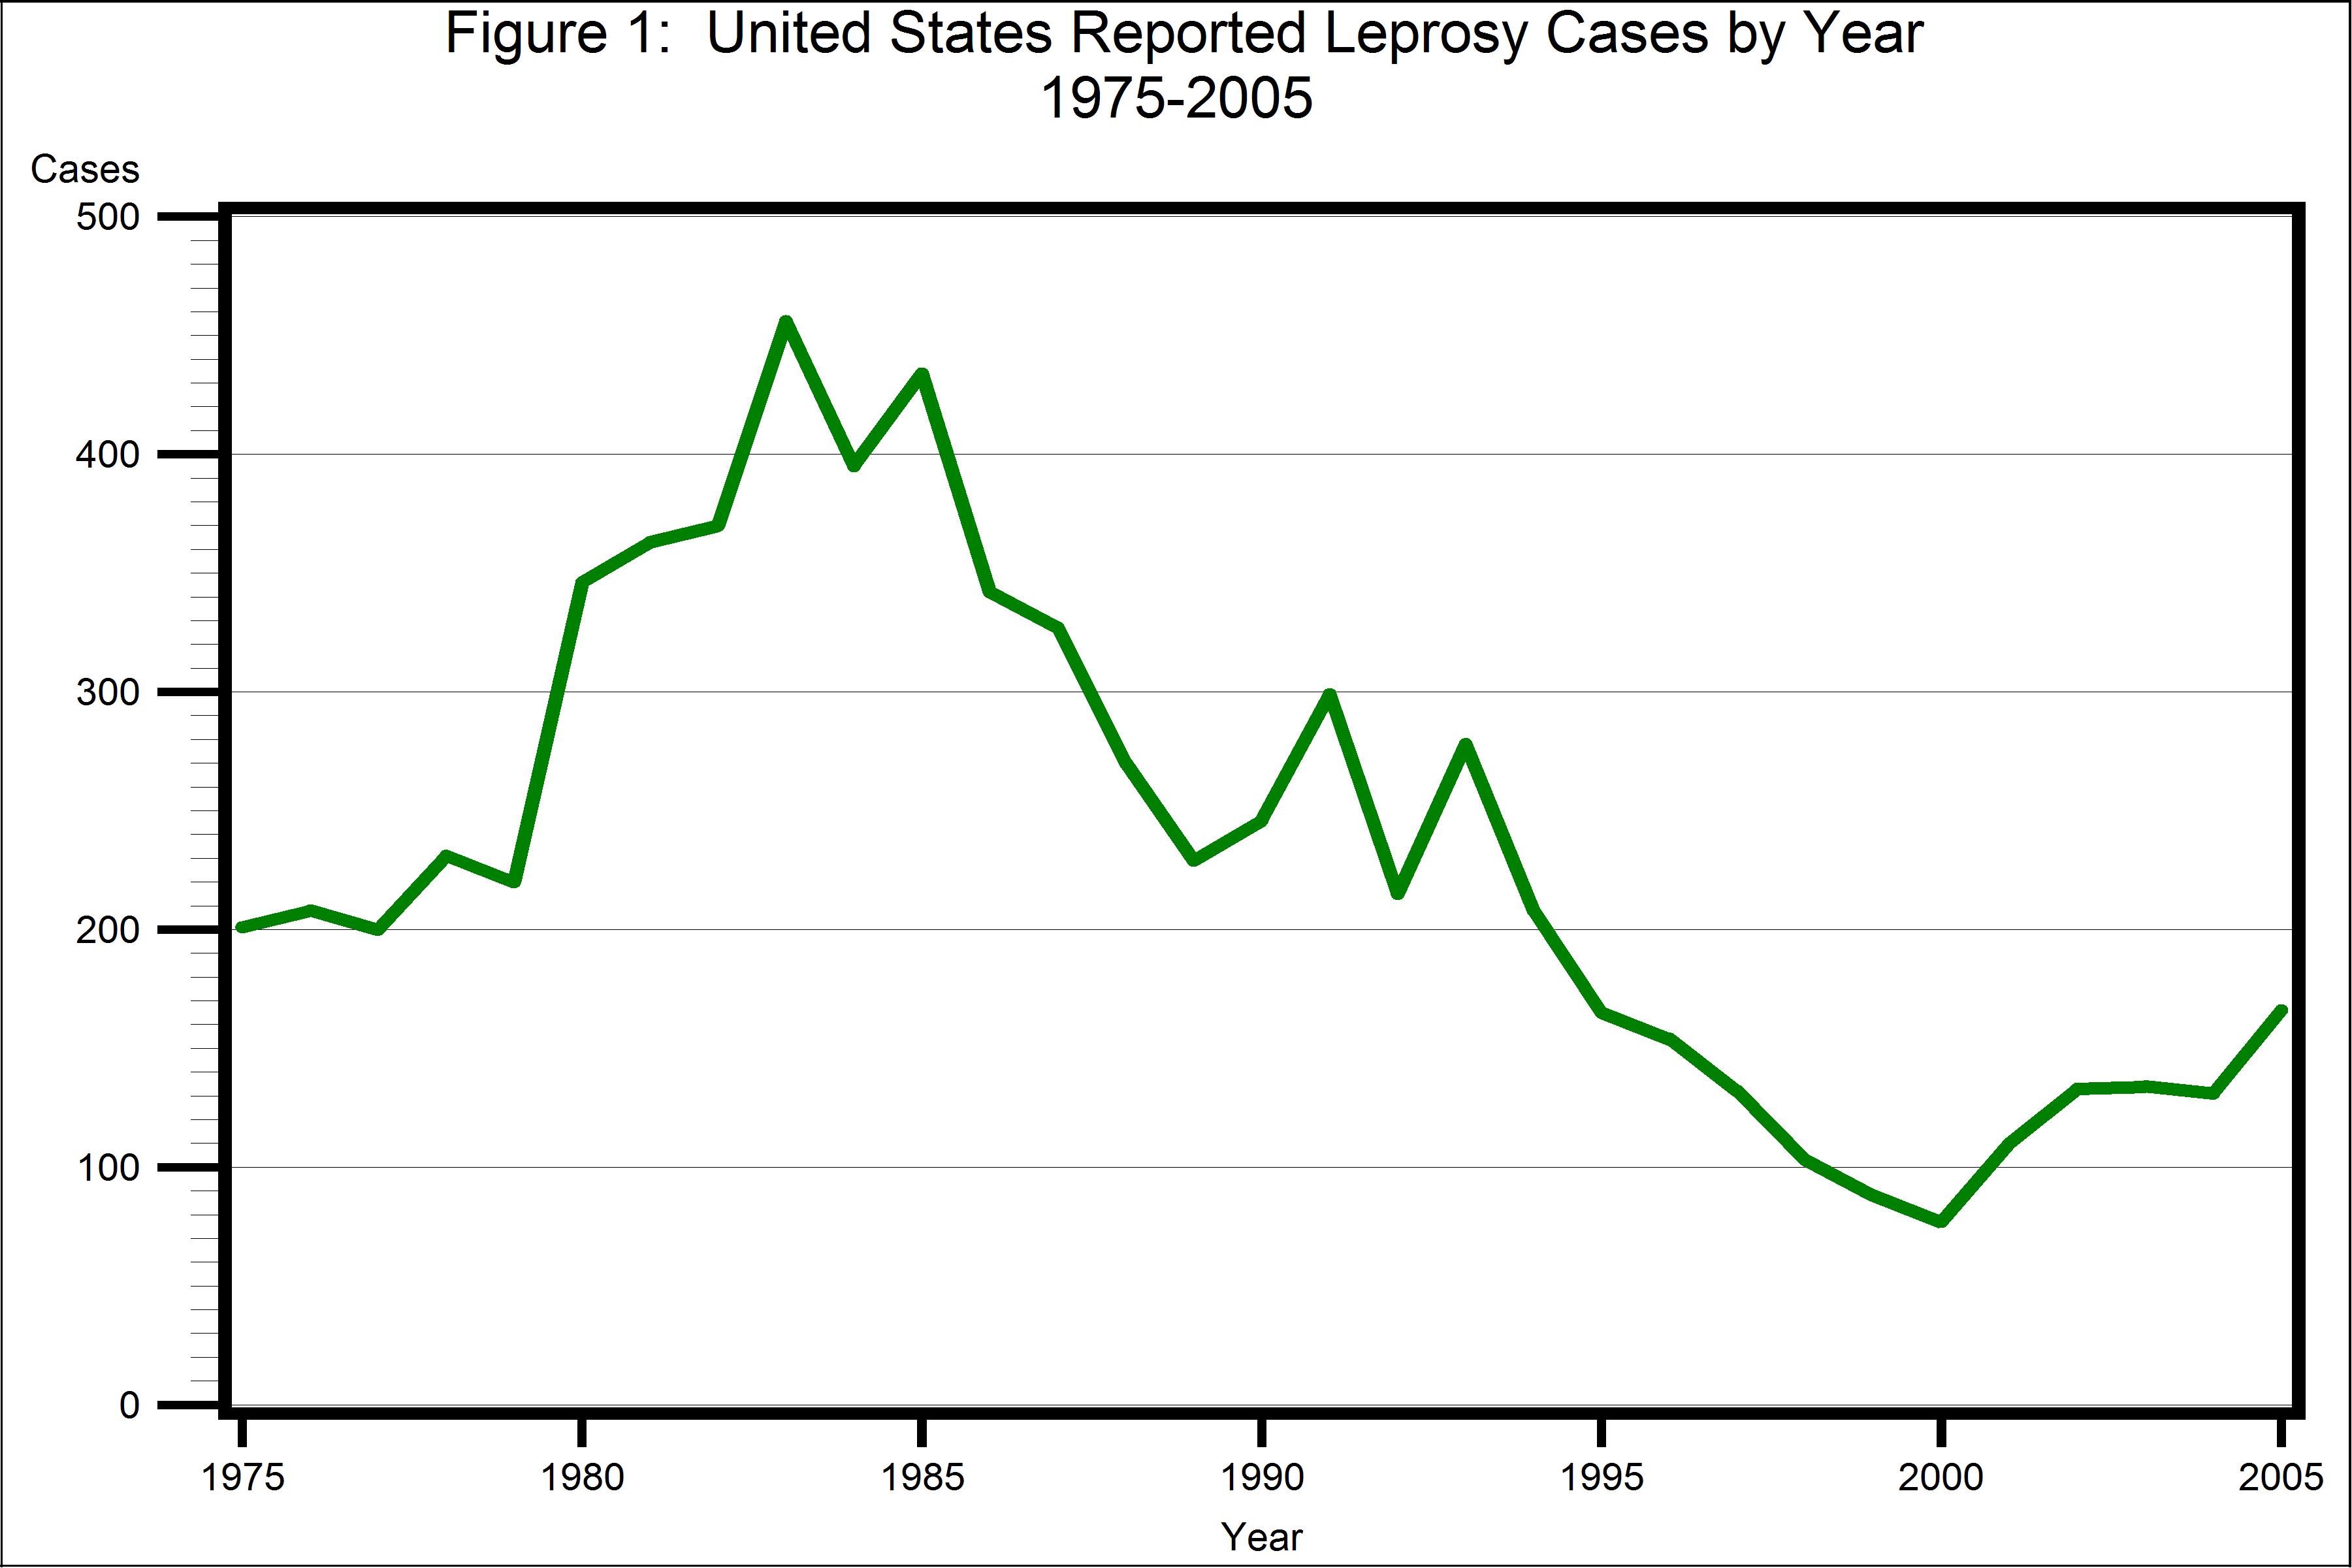 Figure 1: U S Reported Leprosy Cases by Year 1975-2000